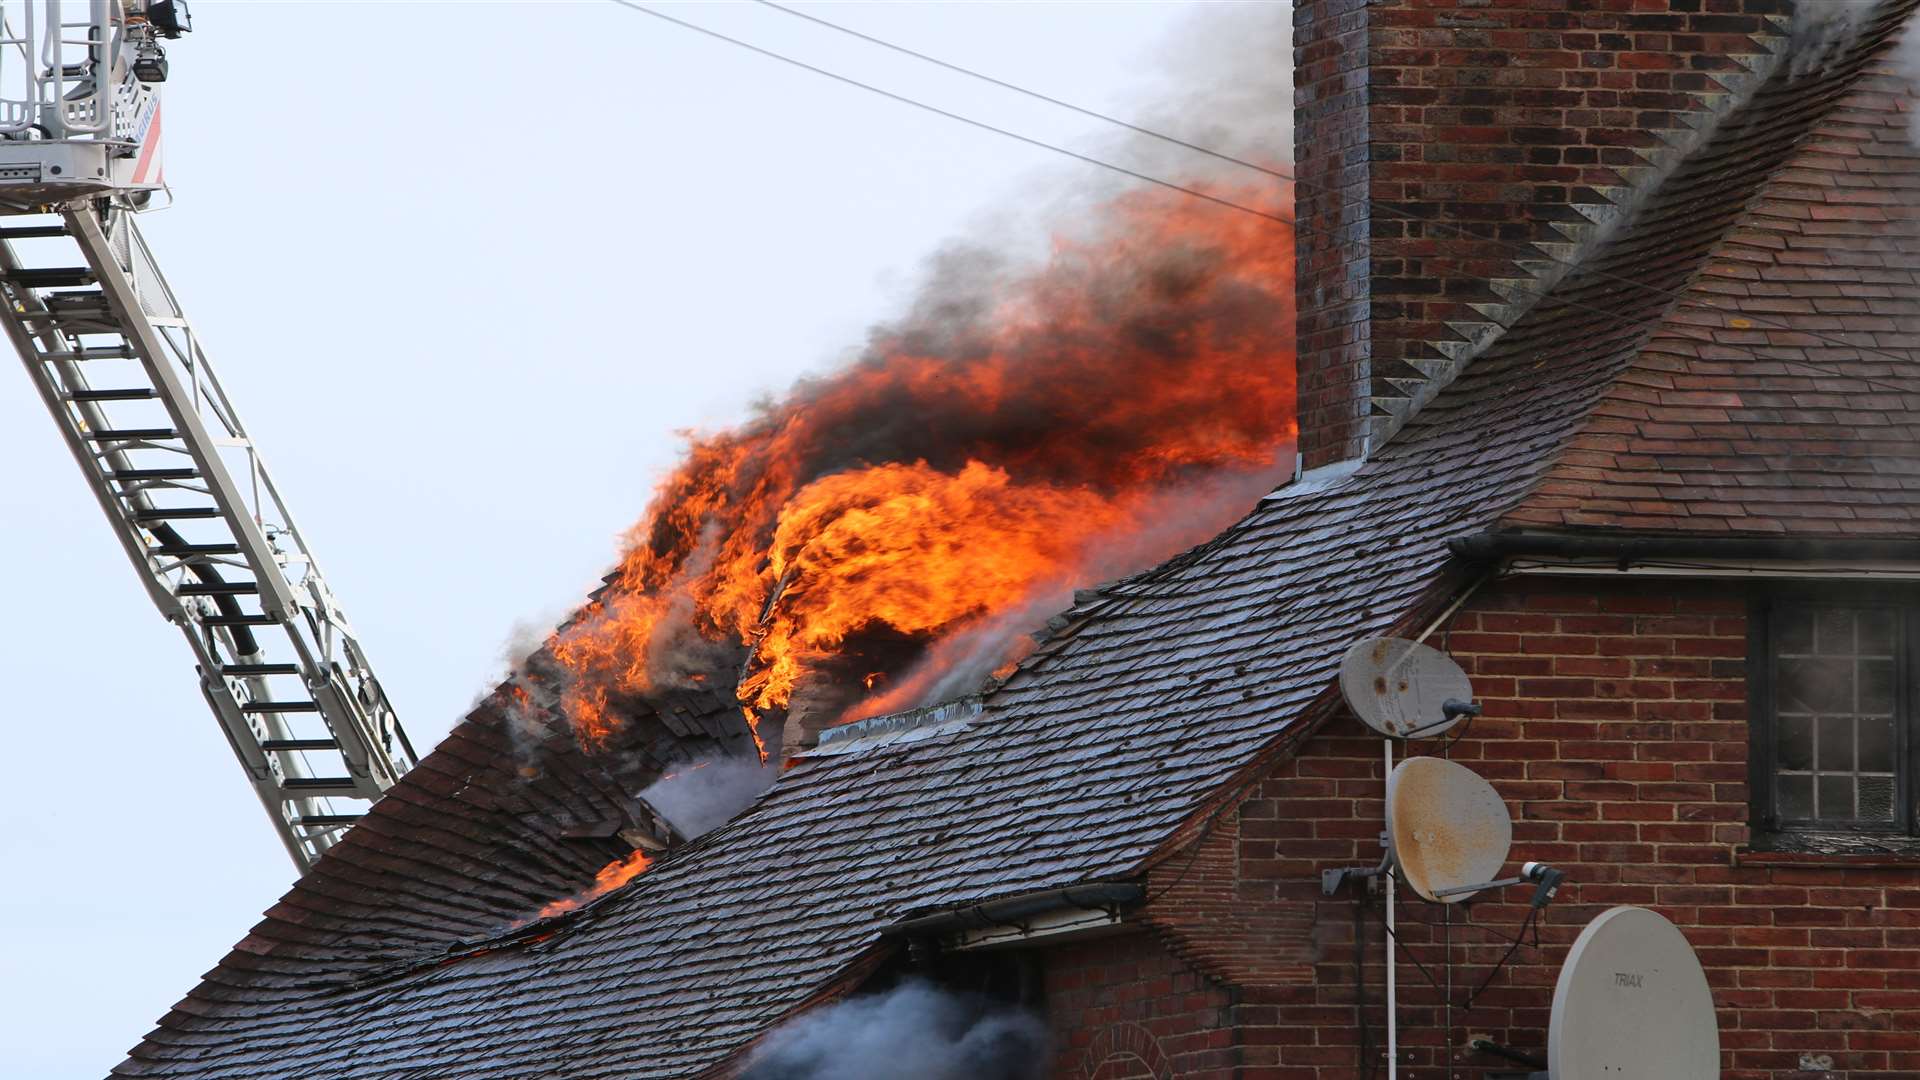 The fire began in the roof of the disused pub. Picture: Daisy Read